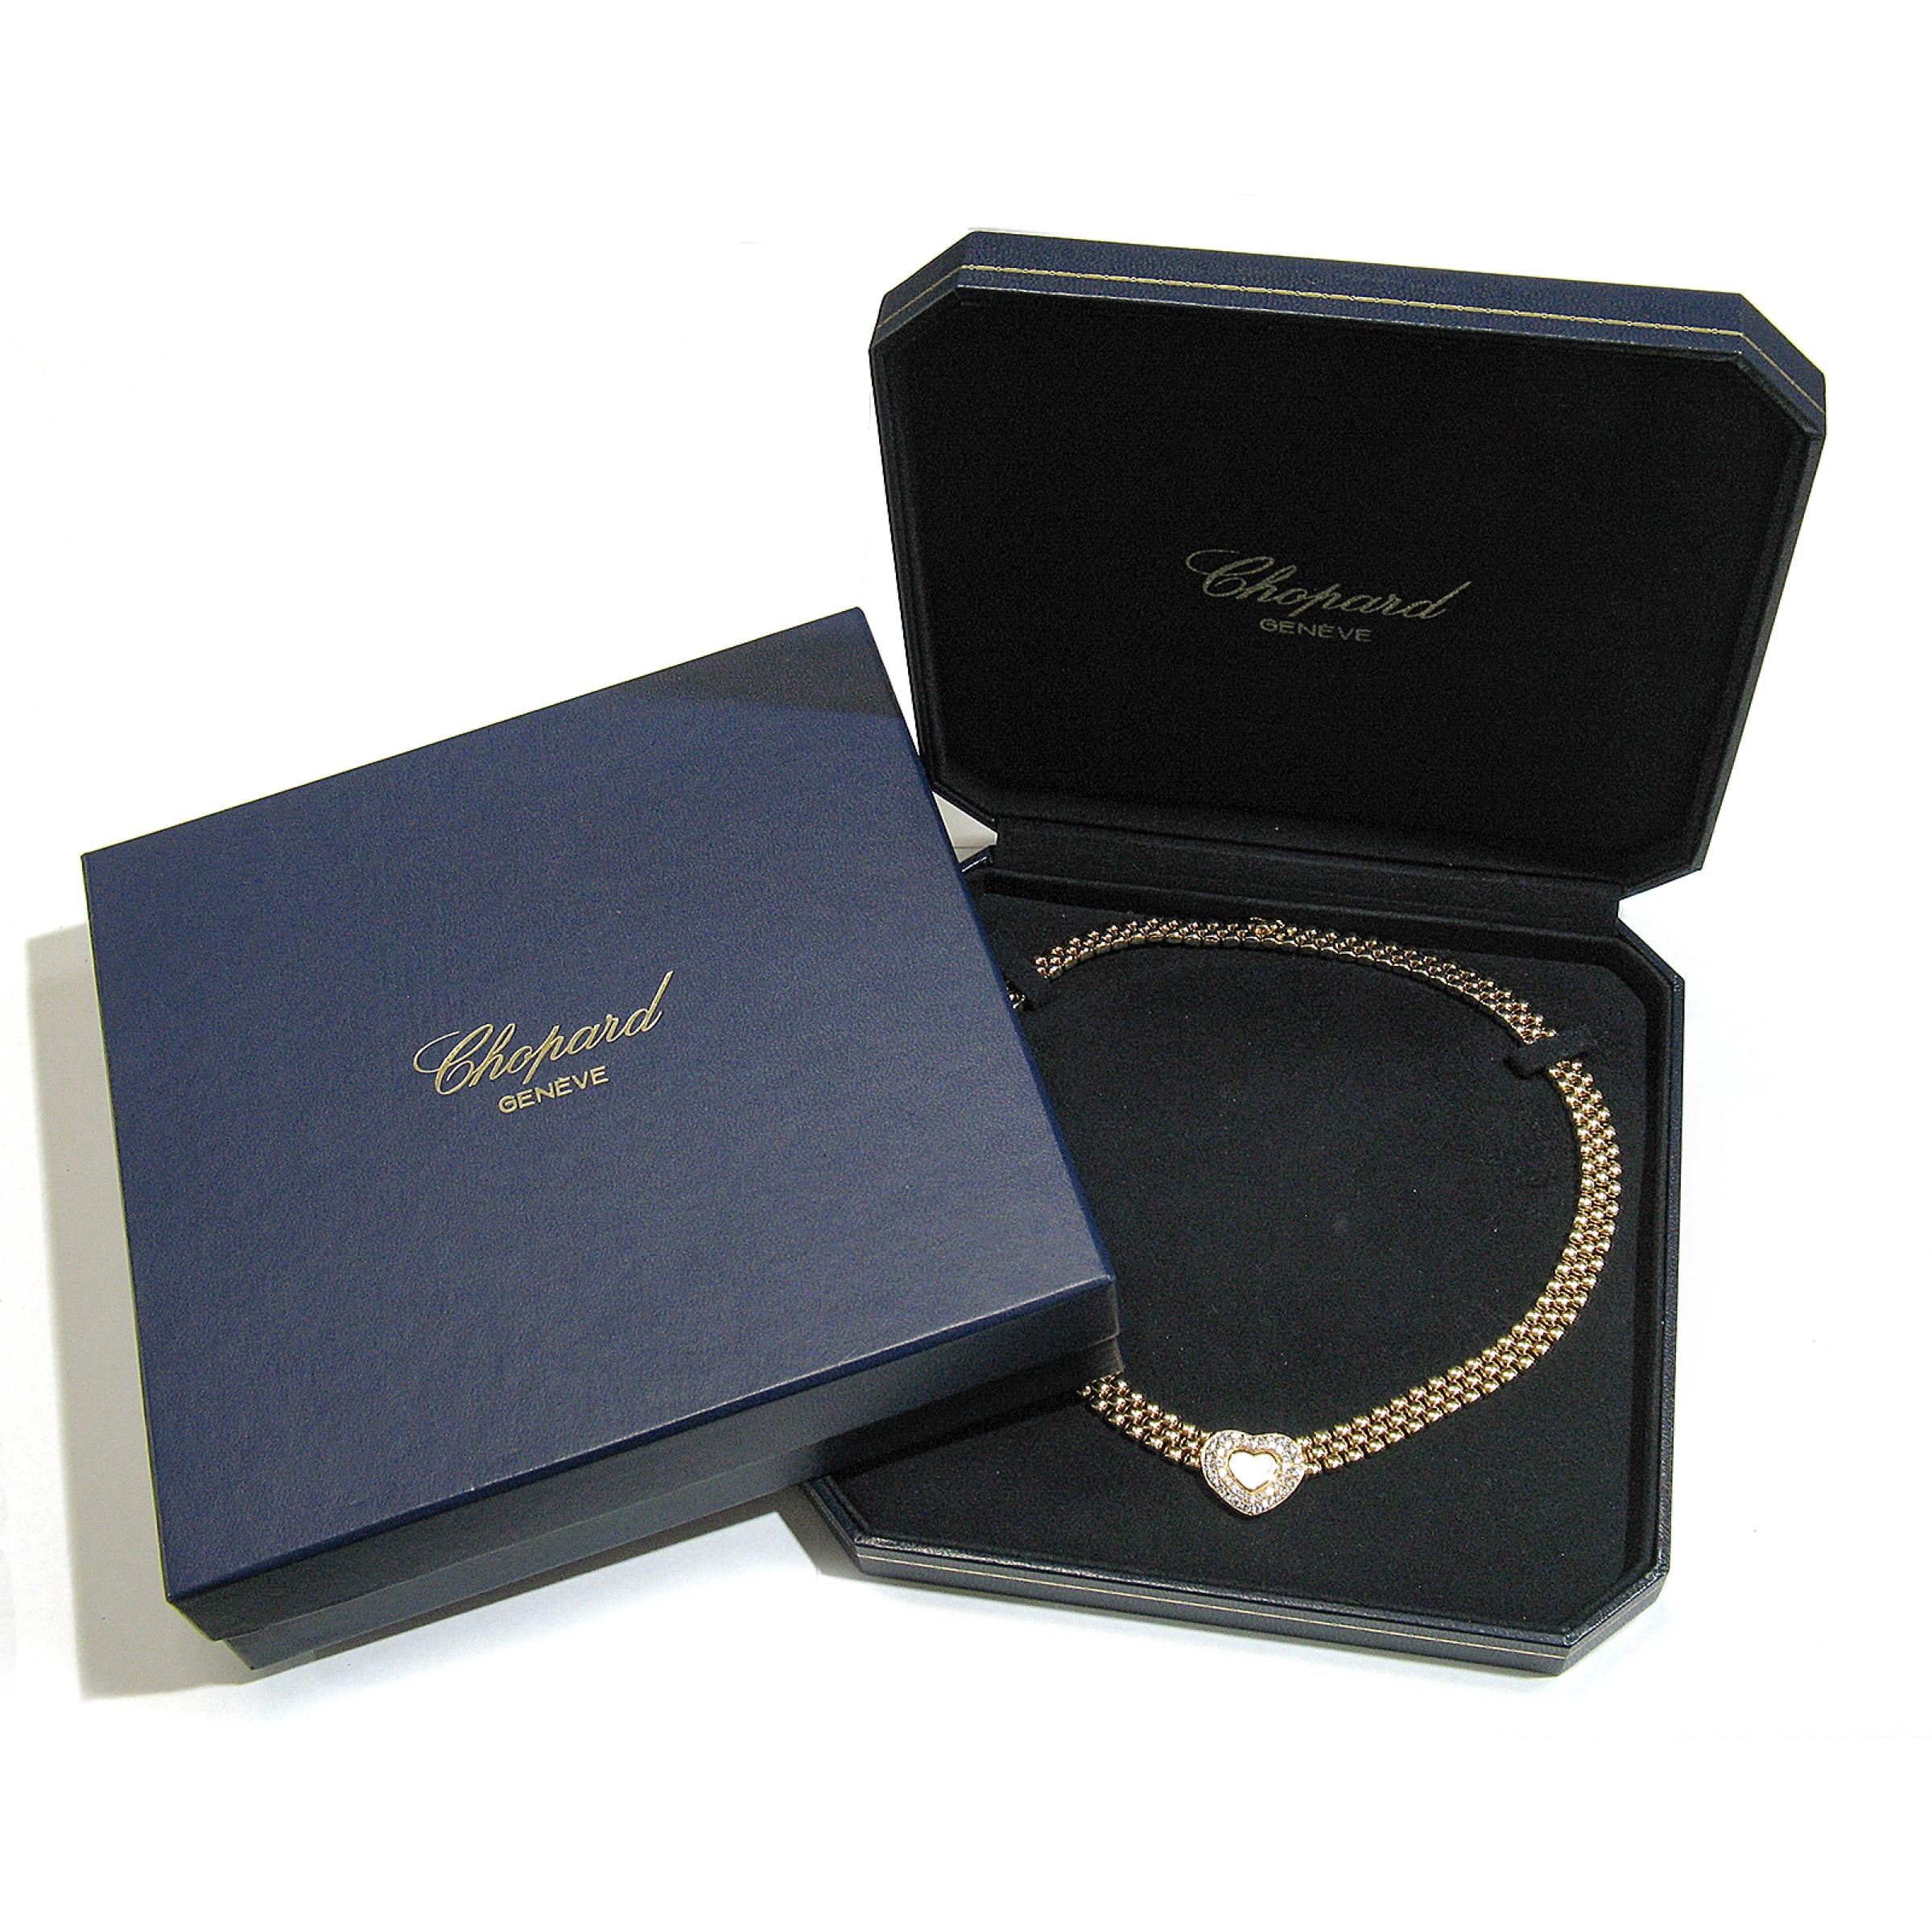 This super elegant and chic luxurious piece from Chopard features their Happy Diamonds statement piece crated in solid 18k gold and featuring approximately 1.25 carats of the finest quality diamonds that are perfectly pave set throughout the heart